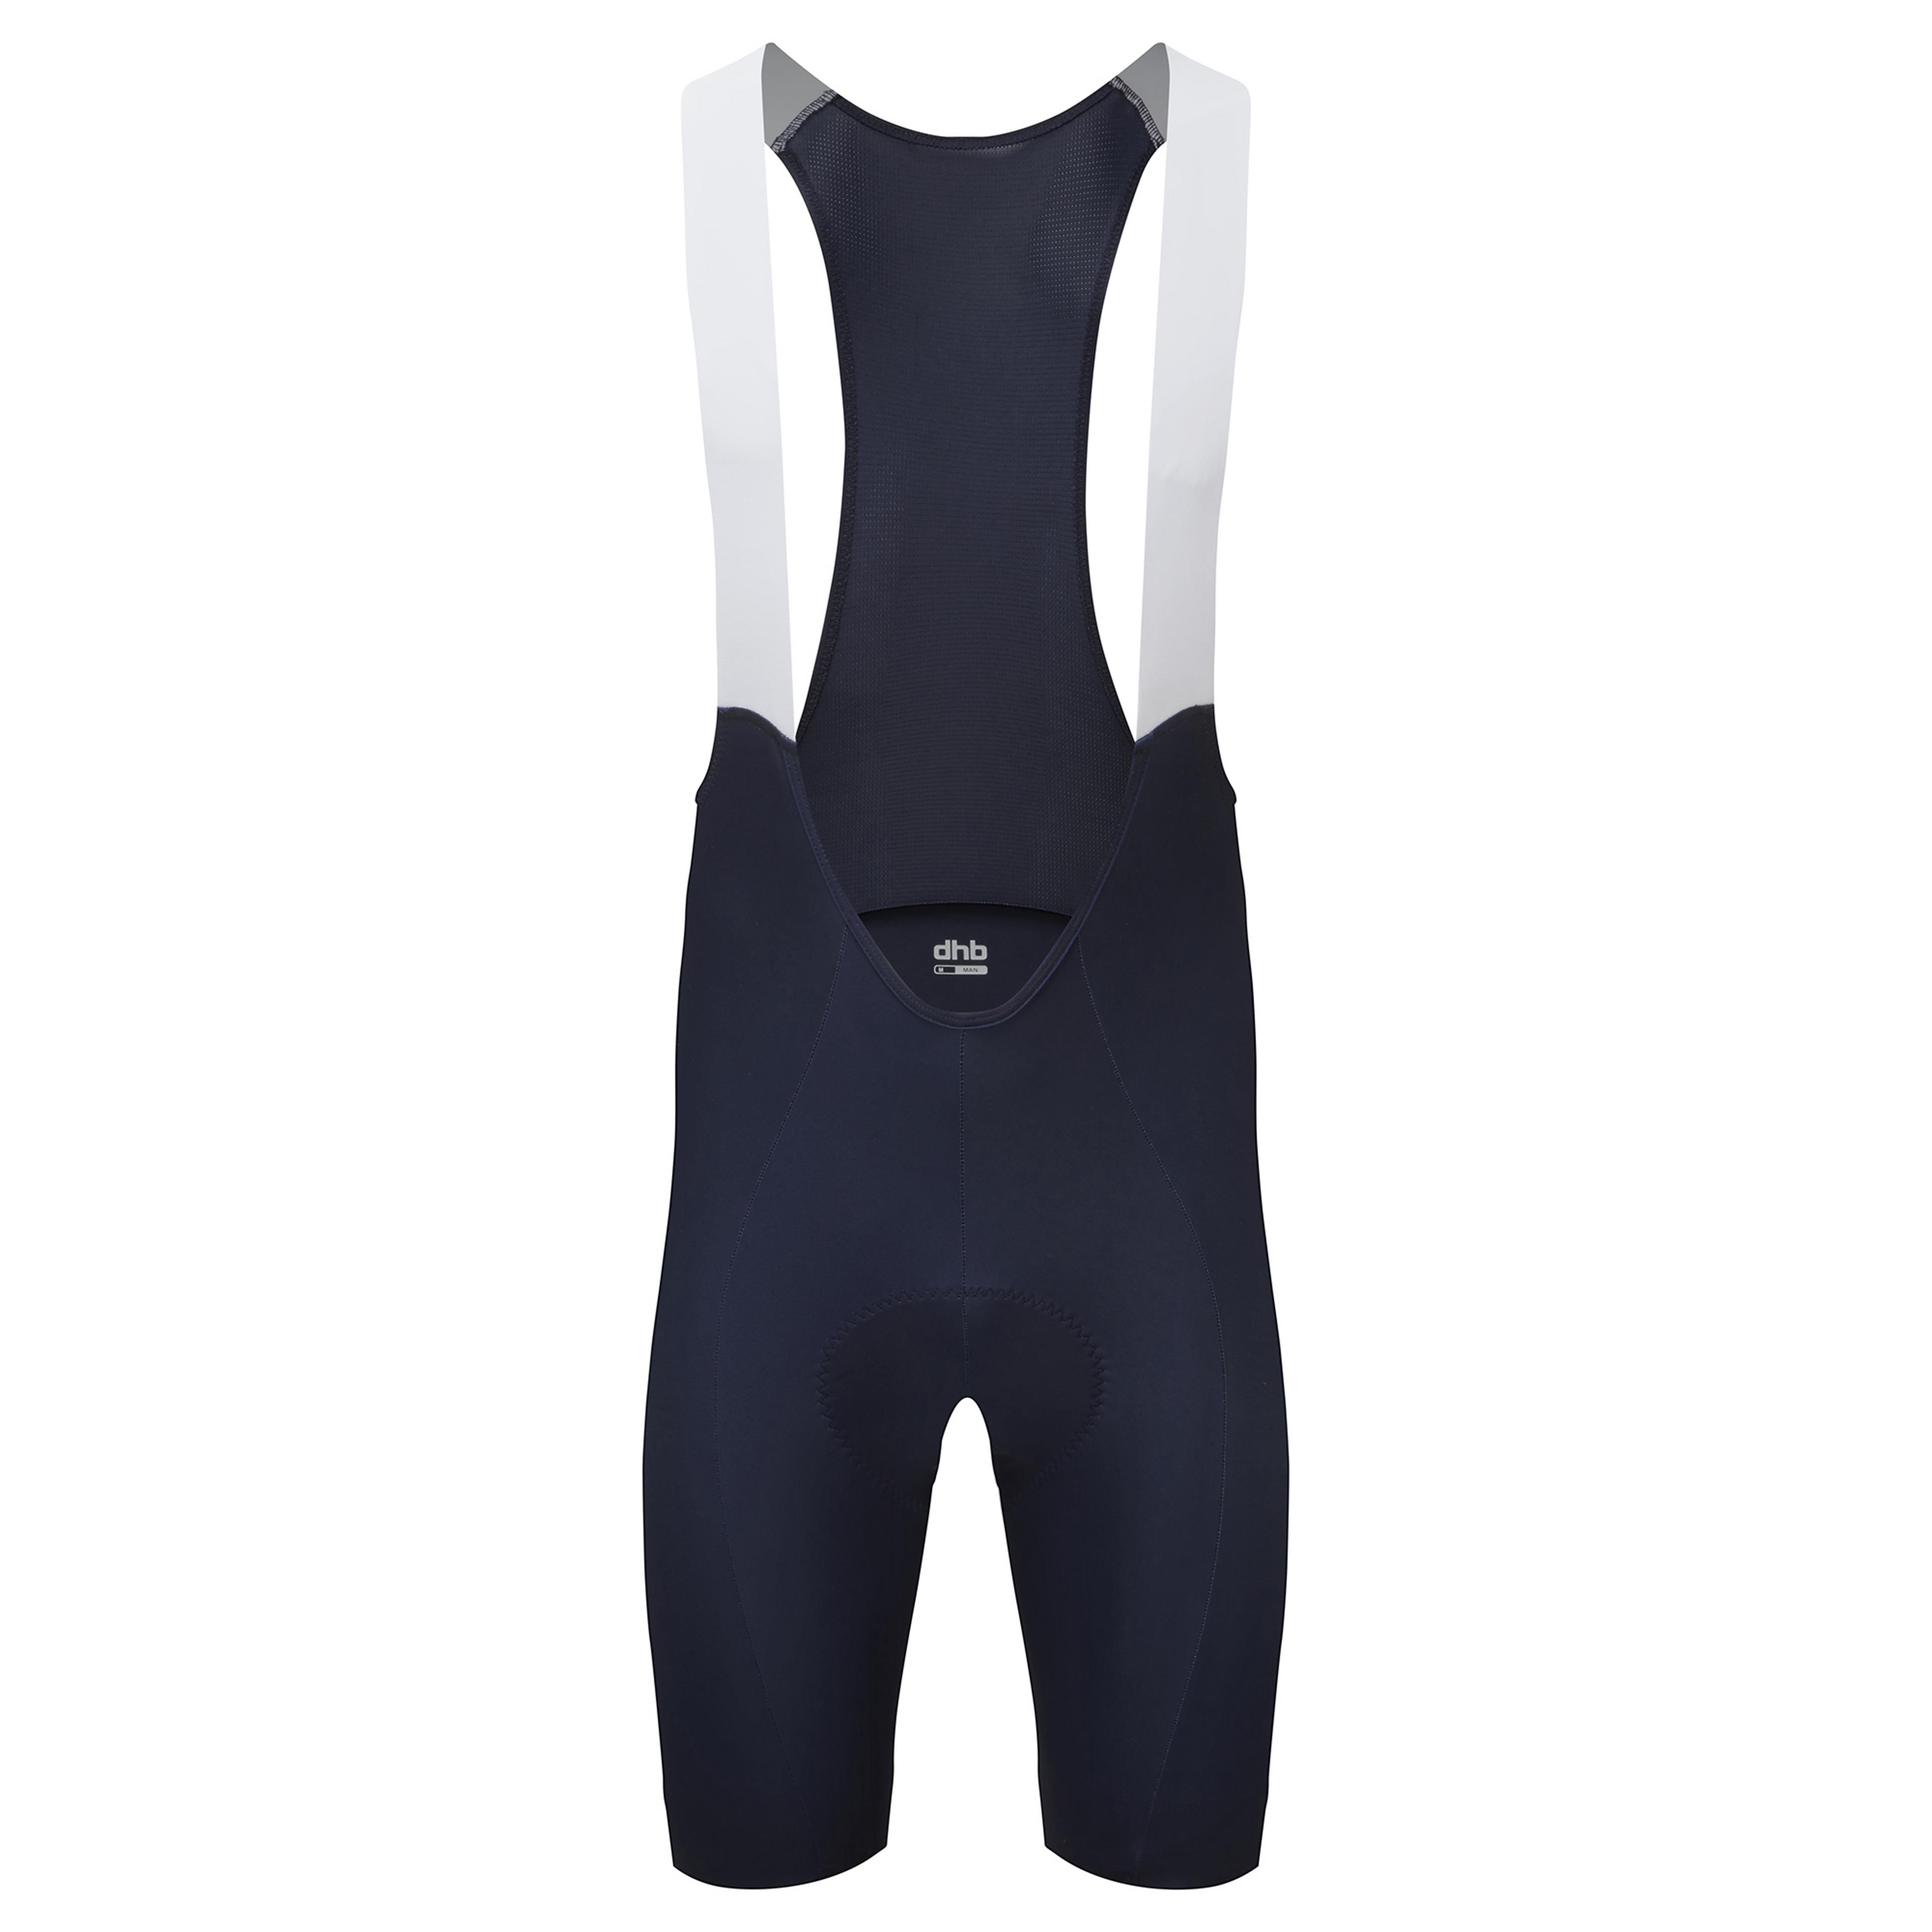 BEST CYCLING BIB SHORTS - In The Know Cycling